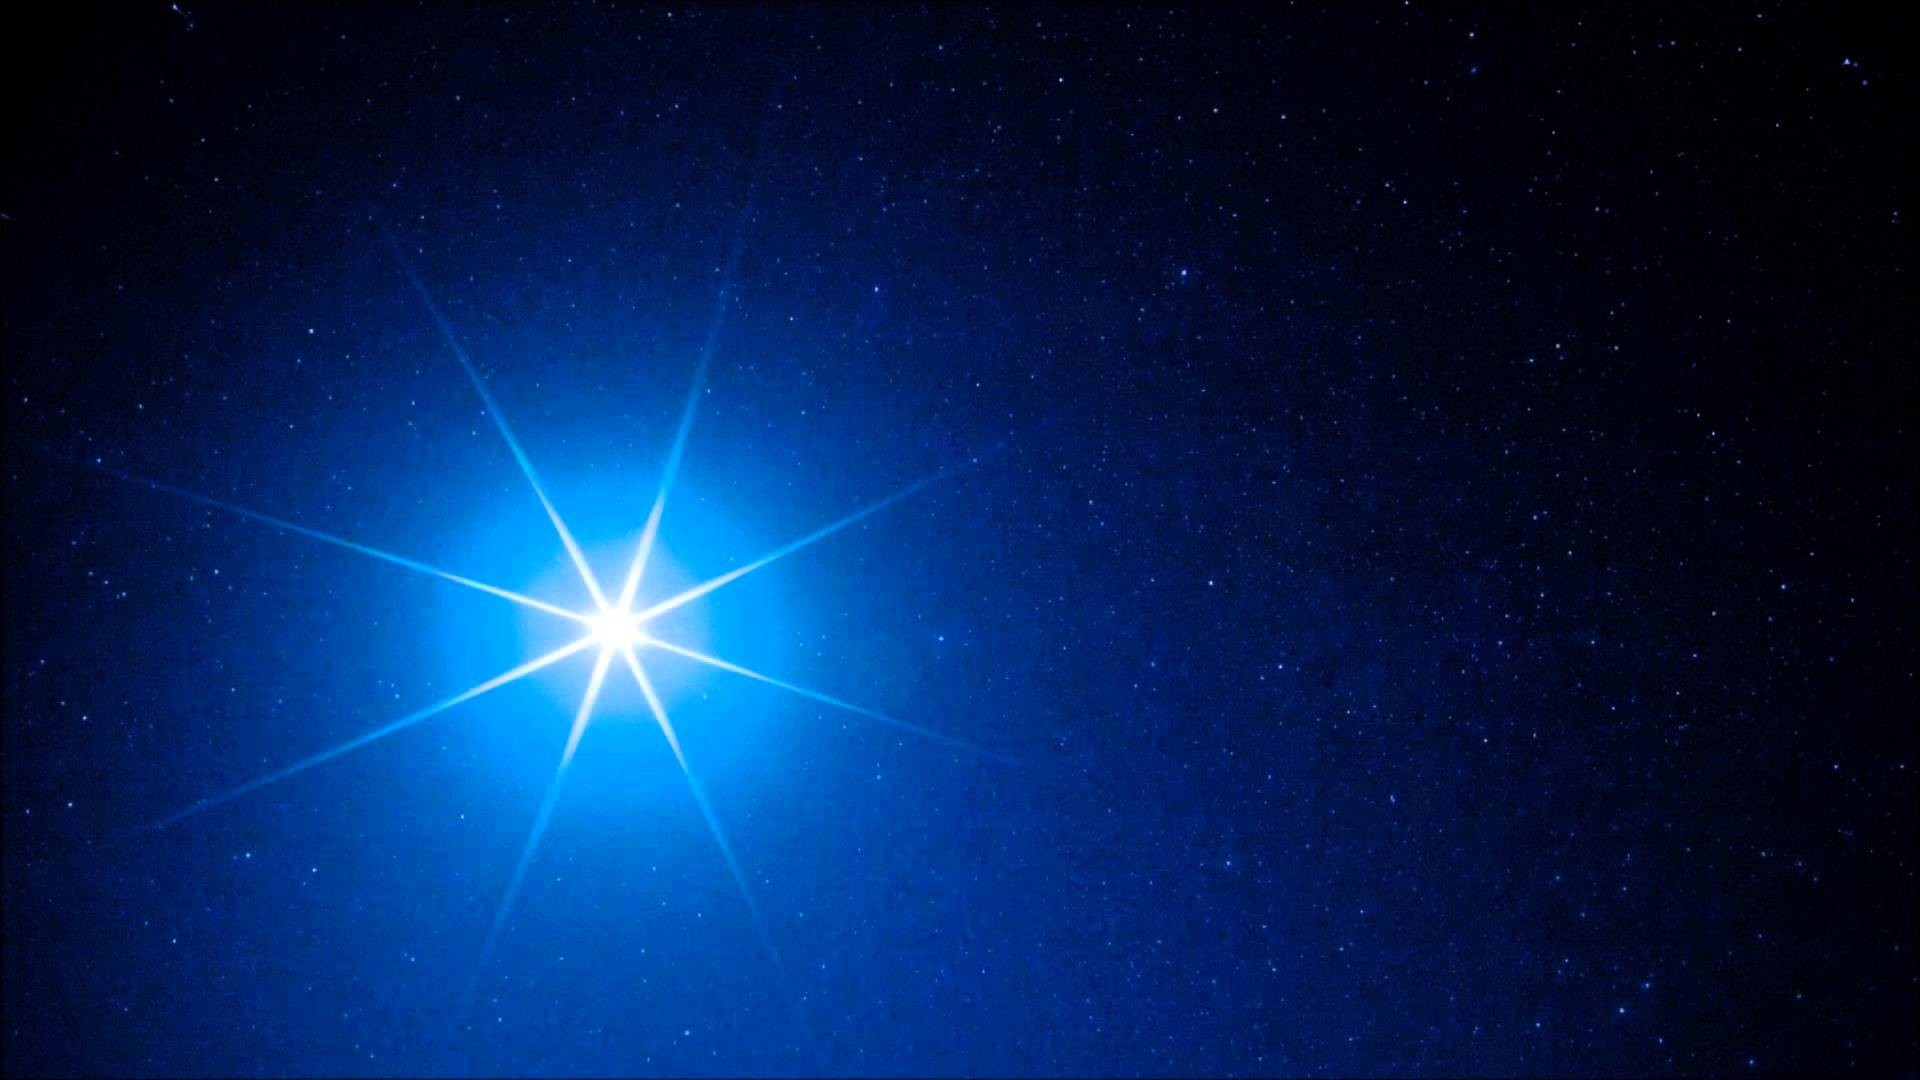 1920x1080 Stars Live Wallpaper - Android Apps on Google Play ...